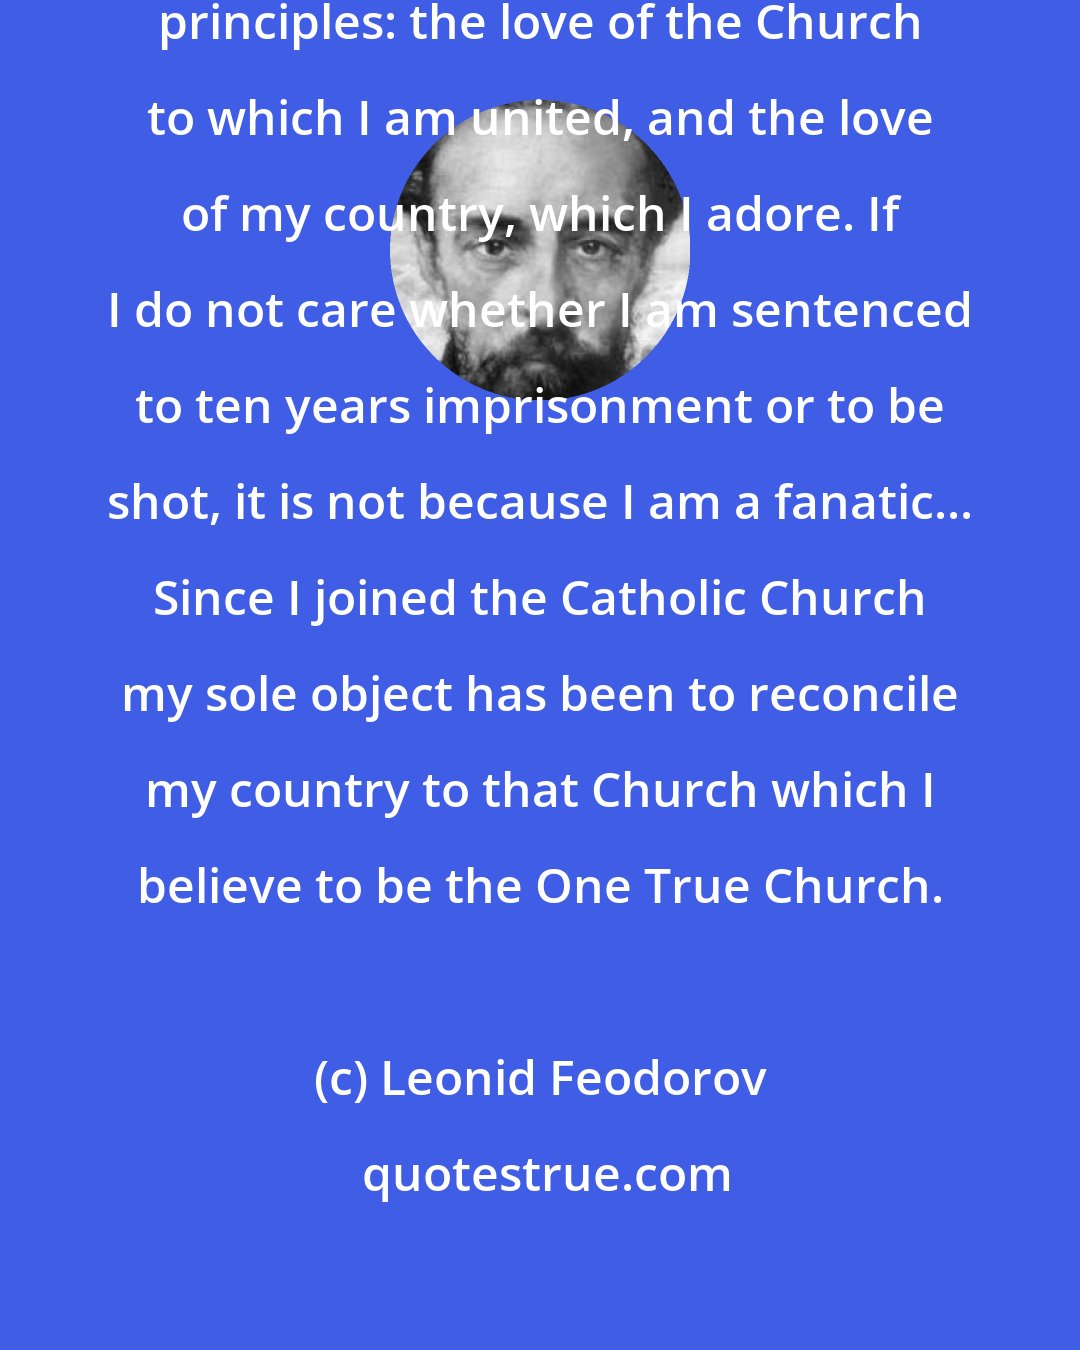 Leonid Feodorov: My whole life has been based on two principles: the love of the Church to which I am united, and the love of my country, which I adore. If I do not care whether I am sentenced to ten years imprisonment or to be shot, it is not because I am a fanatic... Since I joined the Catholic Church my sole object has been to reconcile my country to that Church which I believe to be the One True Church.